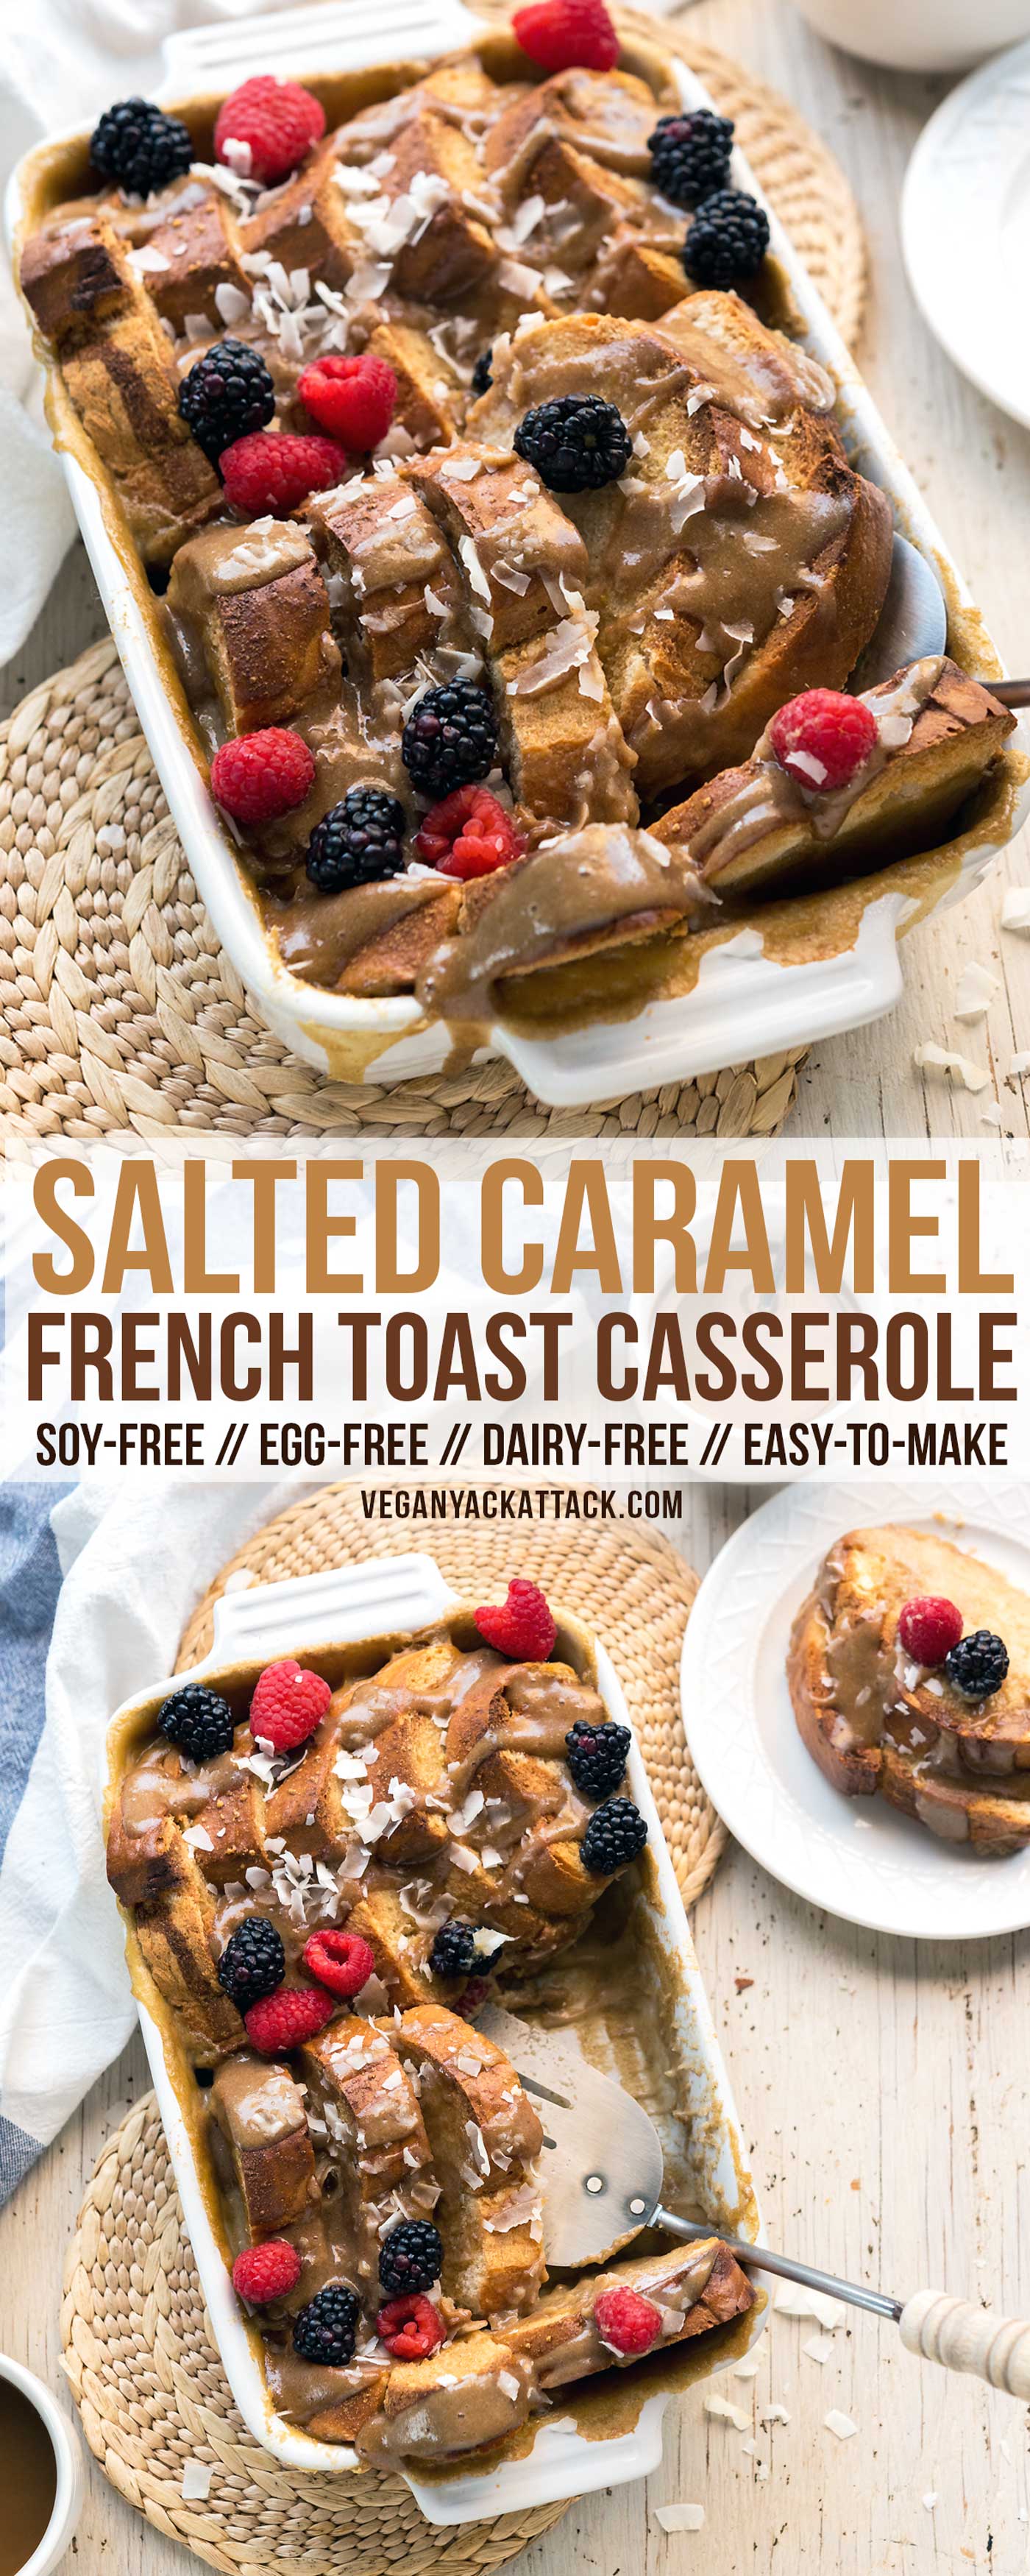 Salted Caramel French Toast Casserole? Yes, please! This decadent brunch staple is vegan, soy-free, and ridiculously delectable. Give it a try, you won't regret it!